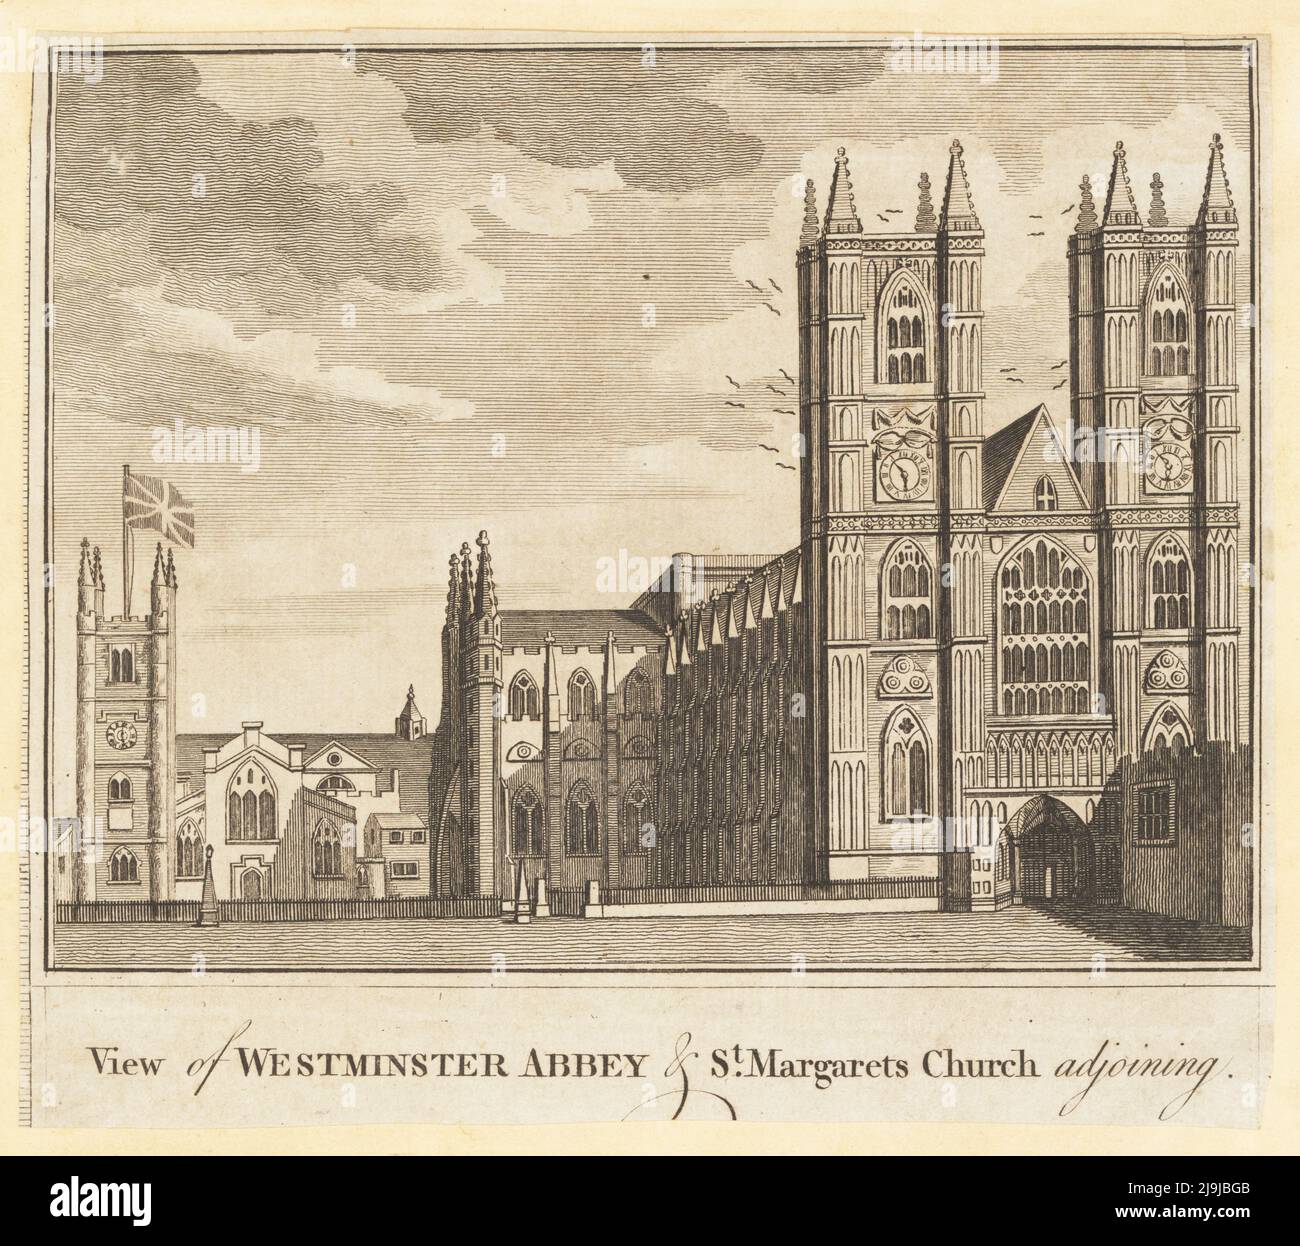 Blick auf die Westminster Abbey und die angrenzende St. Margarets Church. Kupferstich aus William Thornton’s New, Complete and Universal History of the City of London, Alexander Hogg, King's Arms, No. 16 Pamernoster Row, London, 1784. Stockfoto